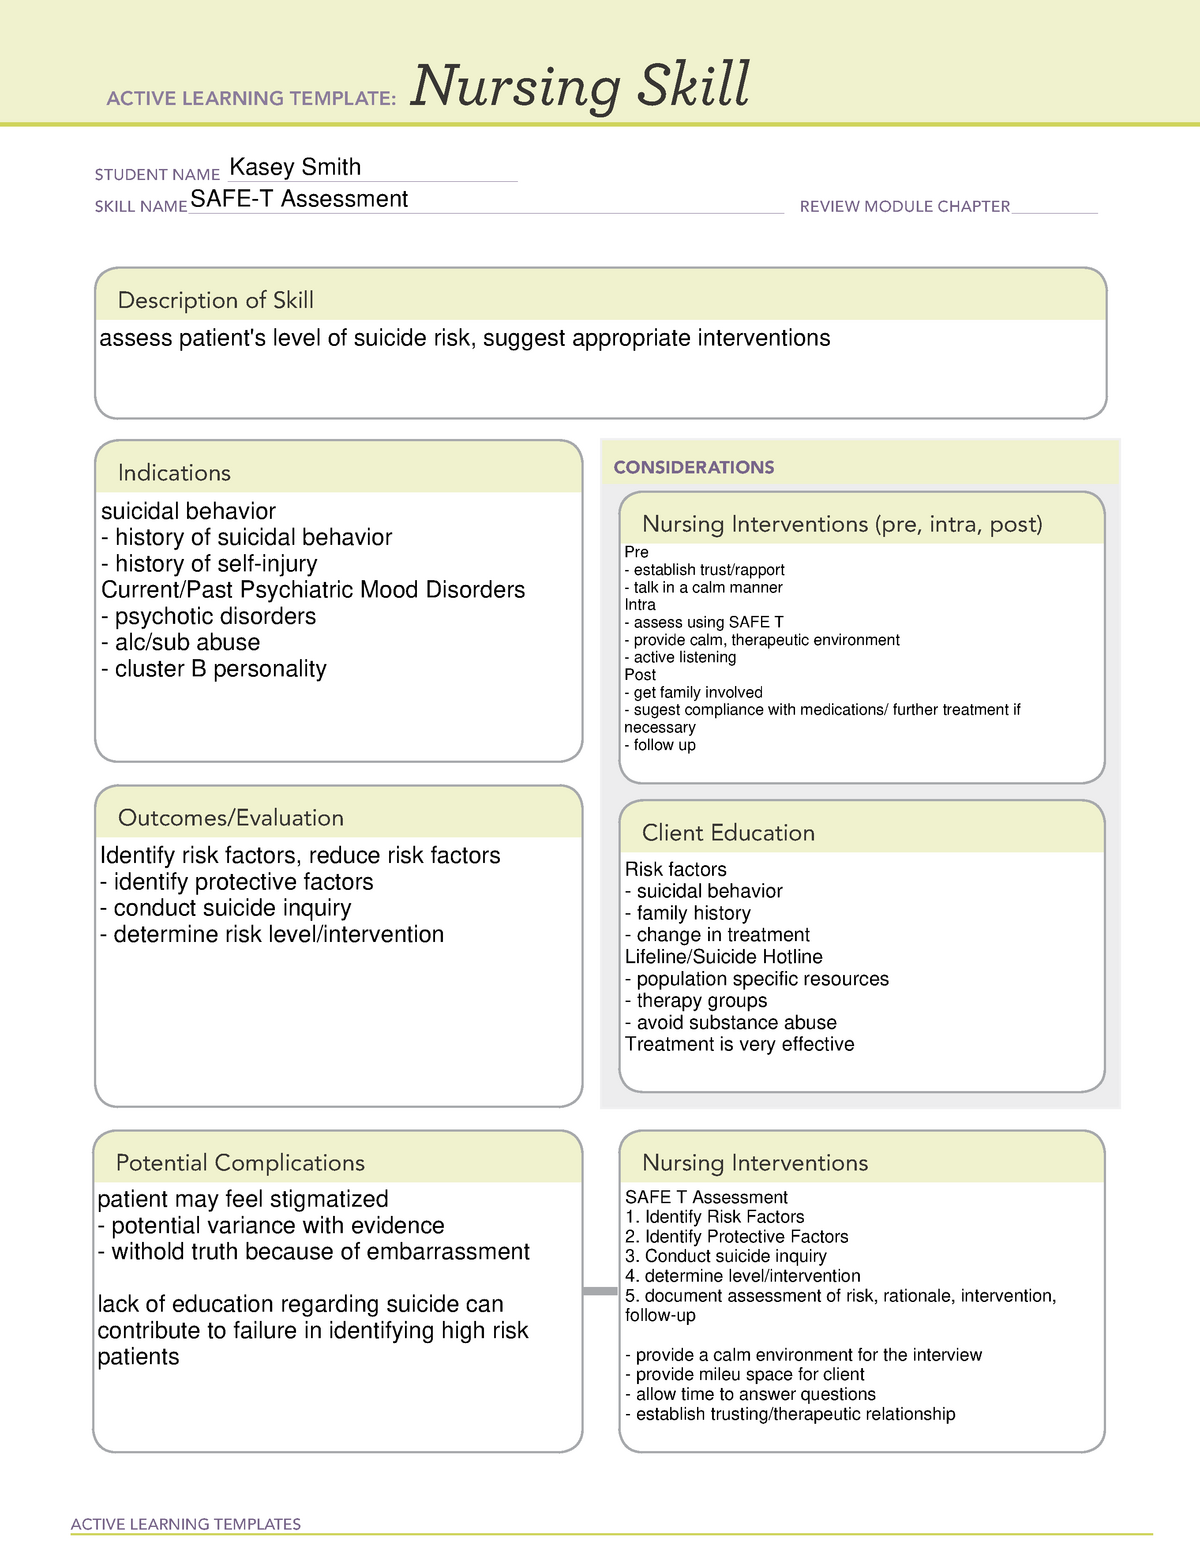 ati-learning-module-safe-t-assessment-active-learning-templates